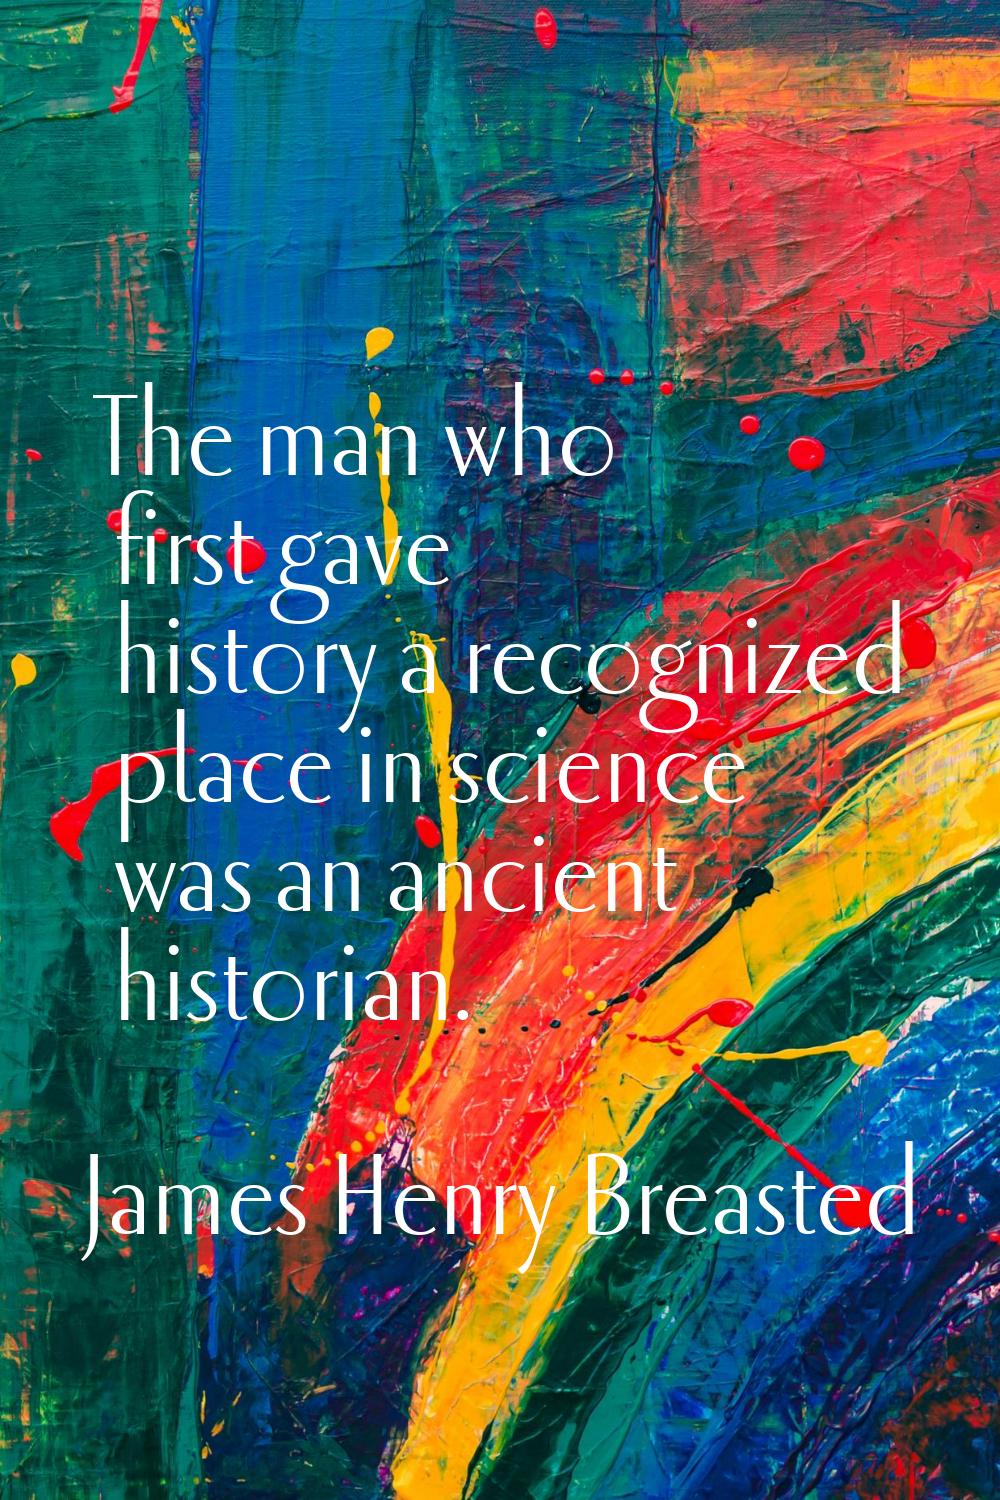 The man who first gave history a recognized place in science was an ancient historian.